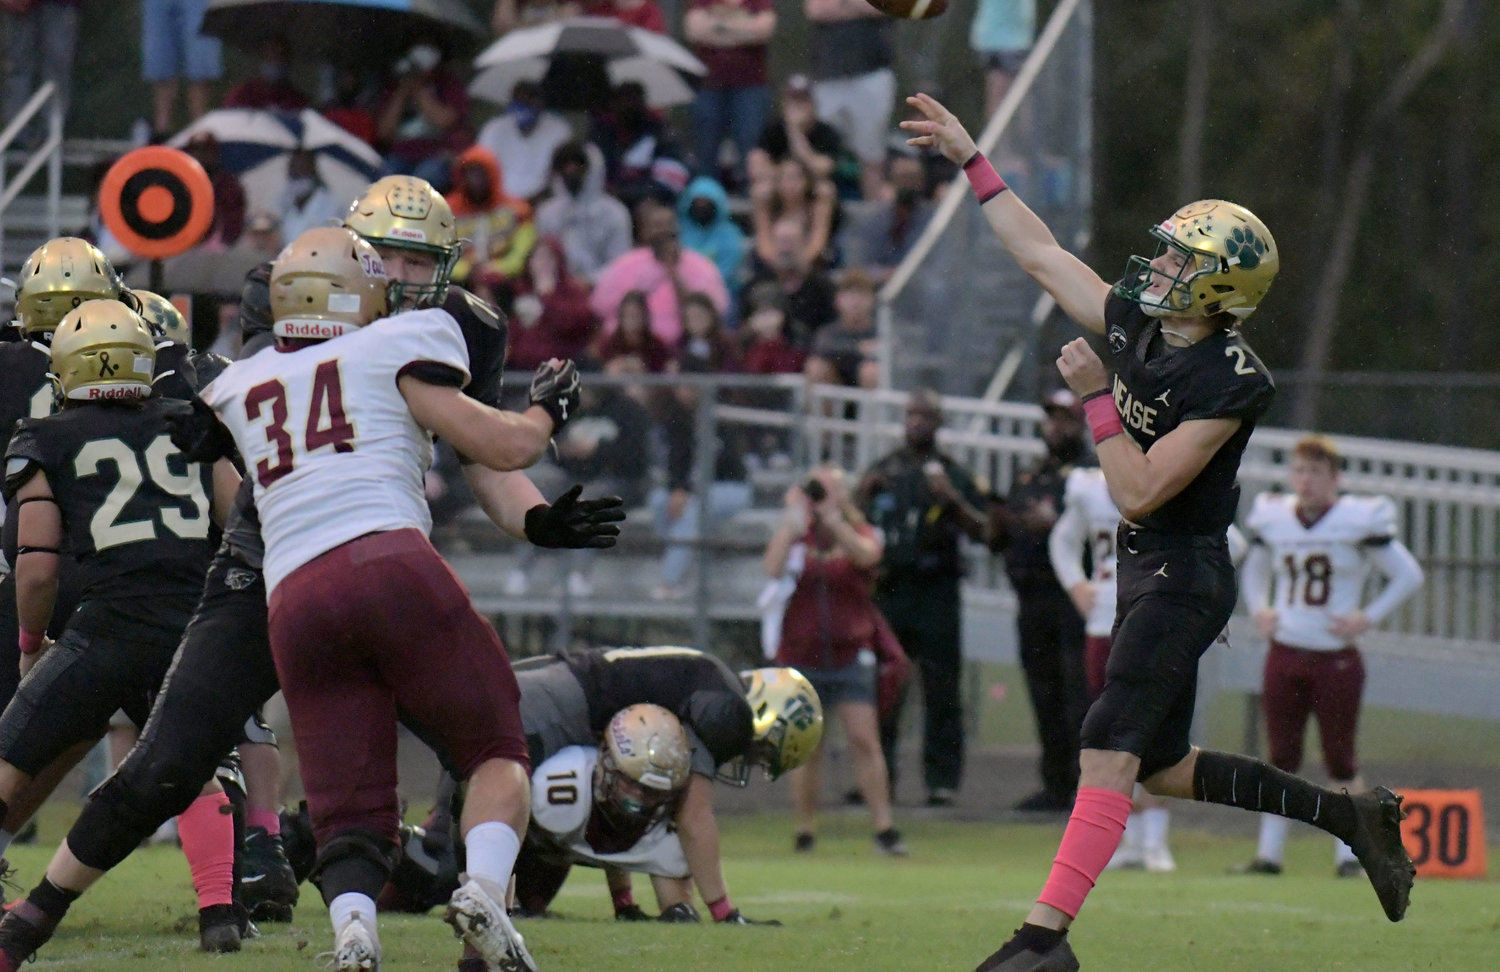 Nease quarterback Marcus Stokes launches a ball downfield against St. Augustine.